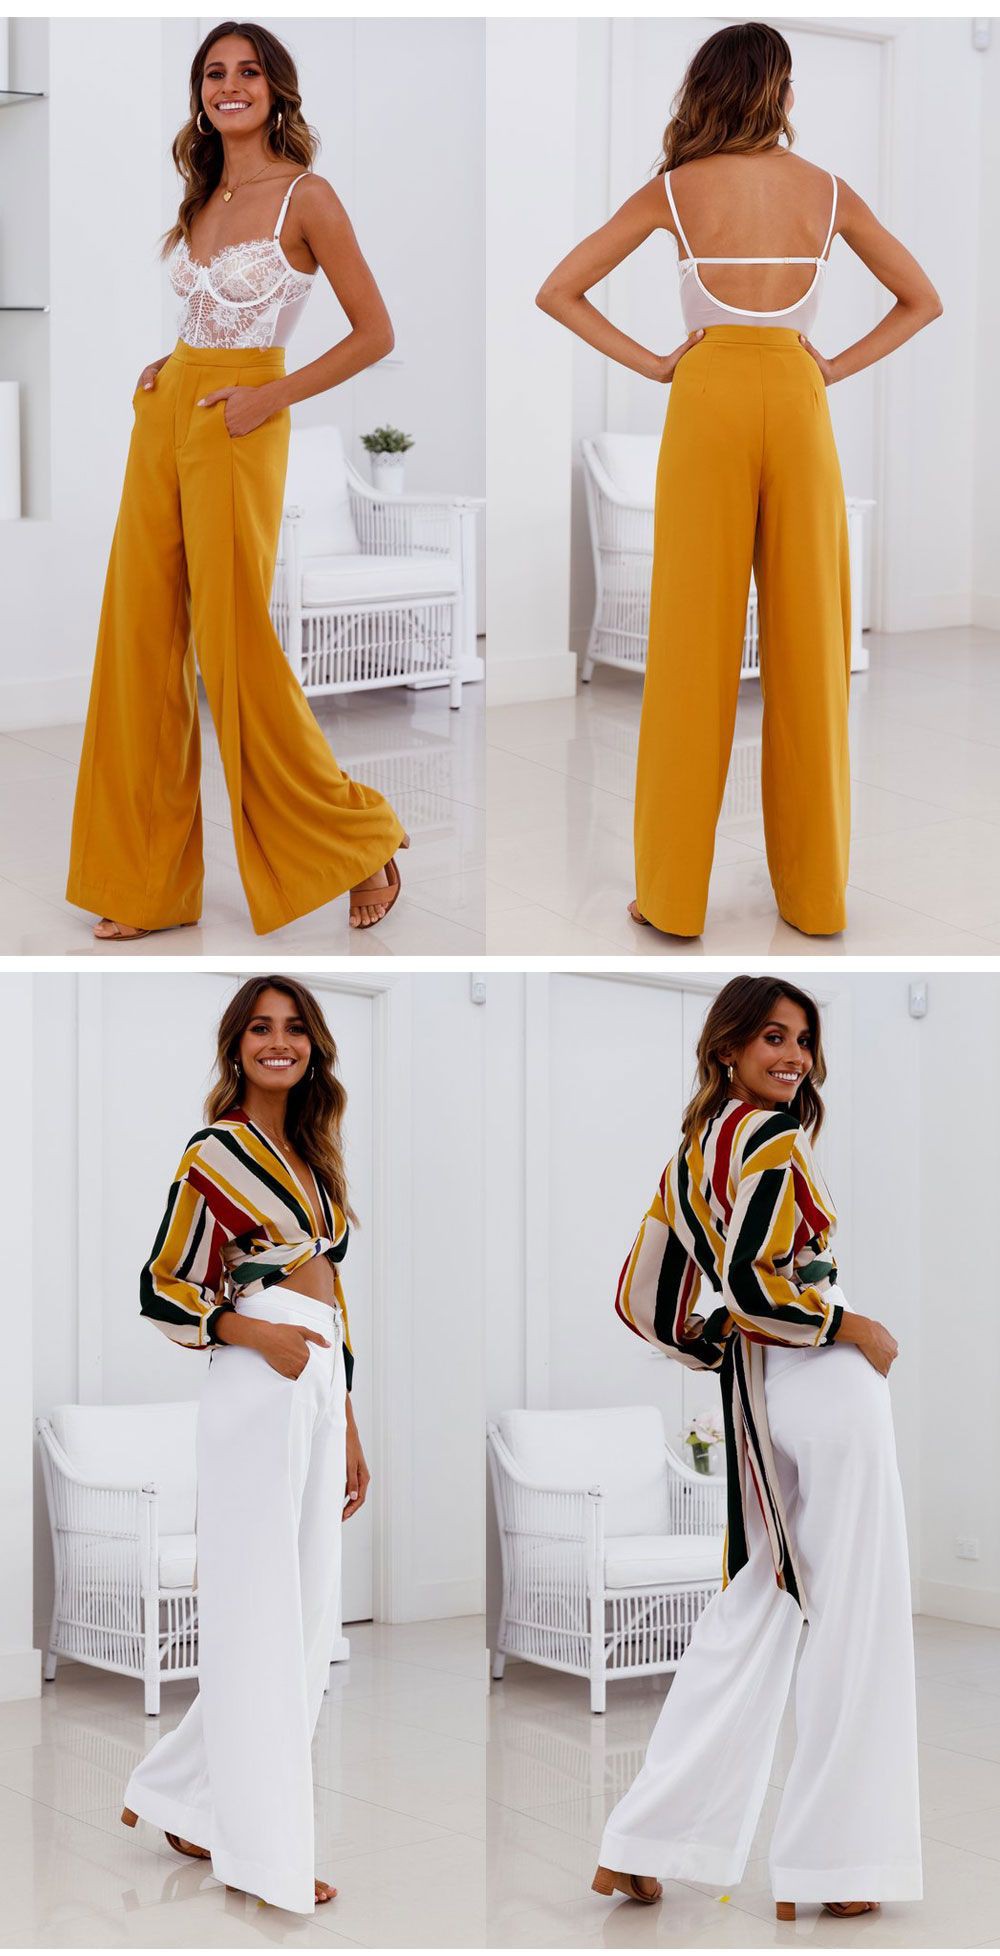 US $15.09 |2018 Women bottom Zip Up Wide Leg Pants Fashion Hight Waist Loose Trousers Chic Streetwear Casual Pants Elegant Female overalls|Pants & Capris|   - AliExpress | Summer Outfit Ideas 2020: Womens clothing,  FASHION,  Outfit Ideas,  summer outfits,  Casual Outfits,  Pants,  Street Outfit Ideas,  Trousers,  Pleated Trousers  